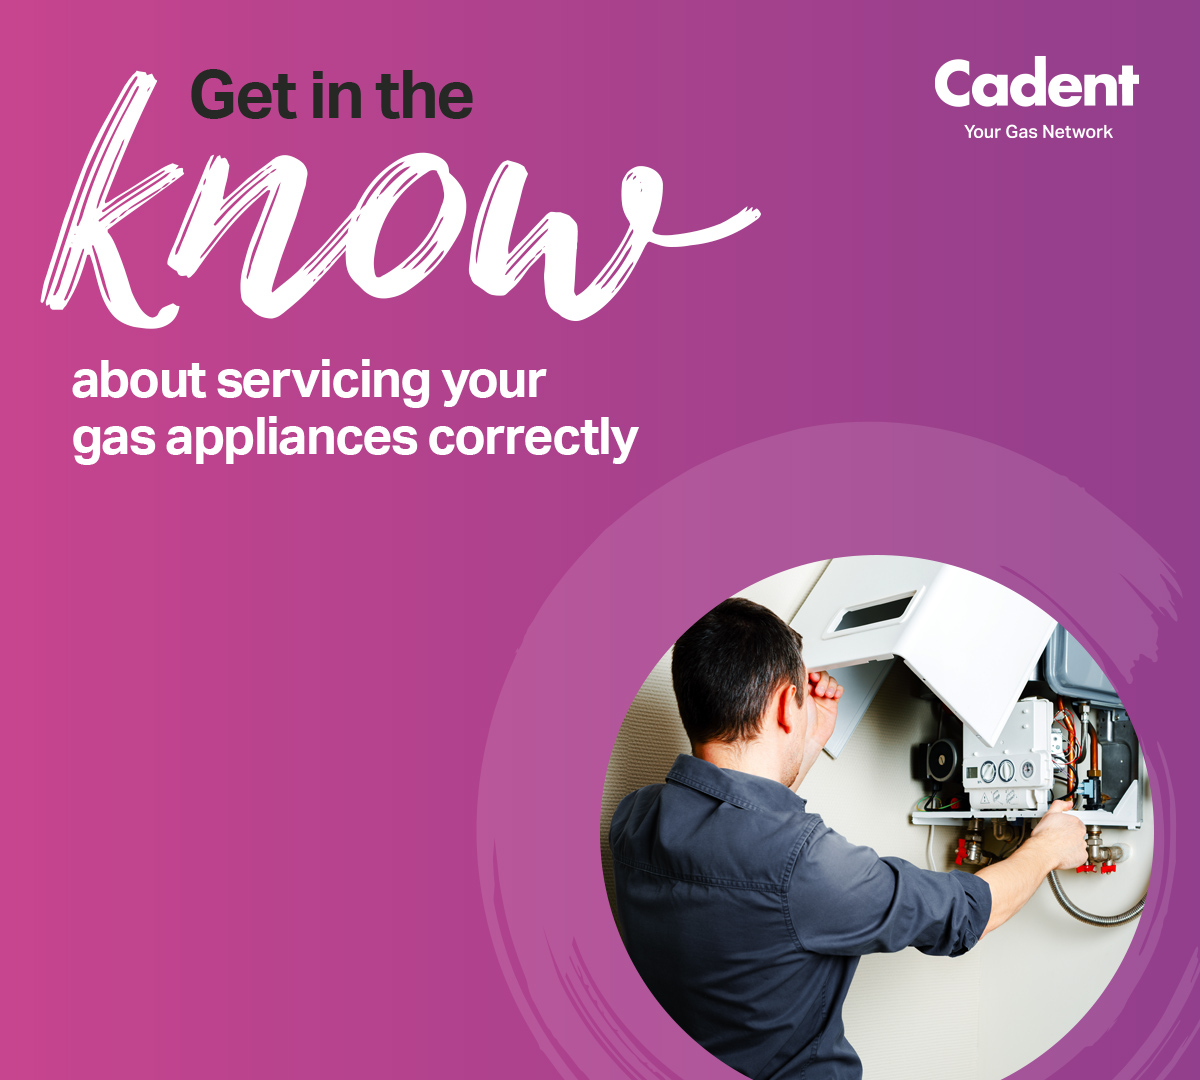 ❗ Get your gas boiler and appliances serviced by a Gas Safe Registered Engineer. Find one at ow.ly/P5gk50Rgpkq or call 0800 408 5500.

👉 If you are having problems with your boiler, follow our troubleshooting guide at: ow.ly/IEUR50RgqrB

#GetintheKnow #GasSafety